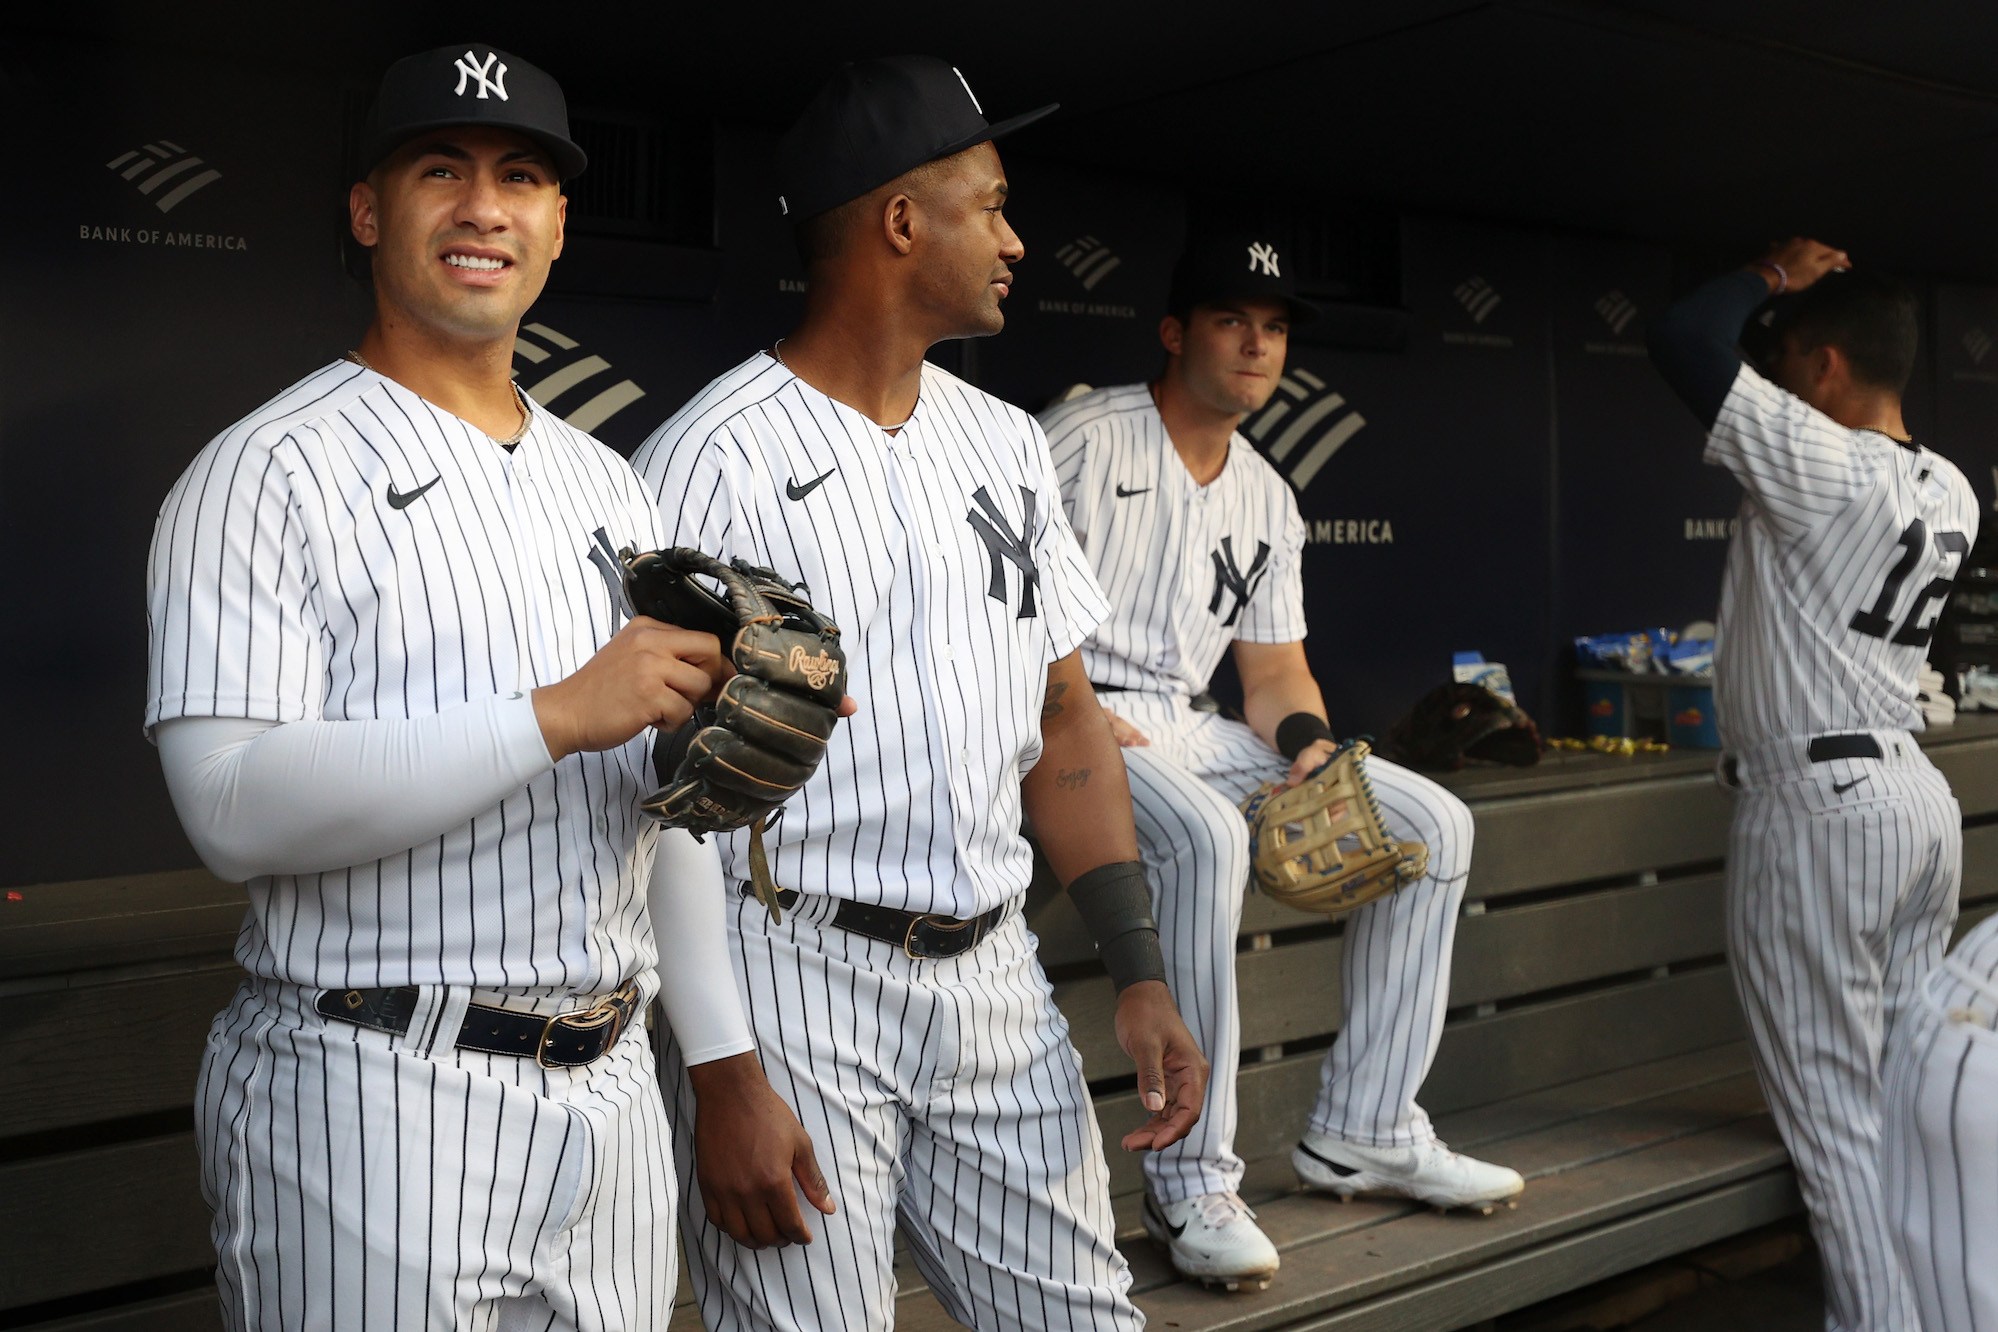 NEW YORK, NEW YORK - AUGUST 16: Gleyber Torres #25 and Miguel Andujar #41 of the New York Yankees look on from the dugout during the first inning against the Tampa Bay Rays at Yankee Stadium on August 16, 2022 in the Bronx borough of New York City. (Photo by Sarah Stier/Getty Images)